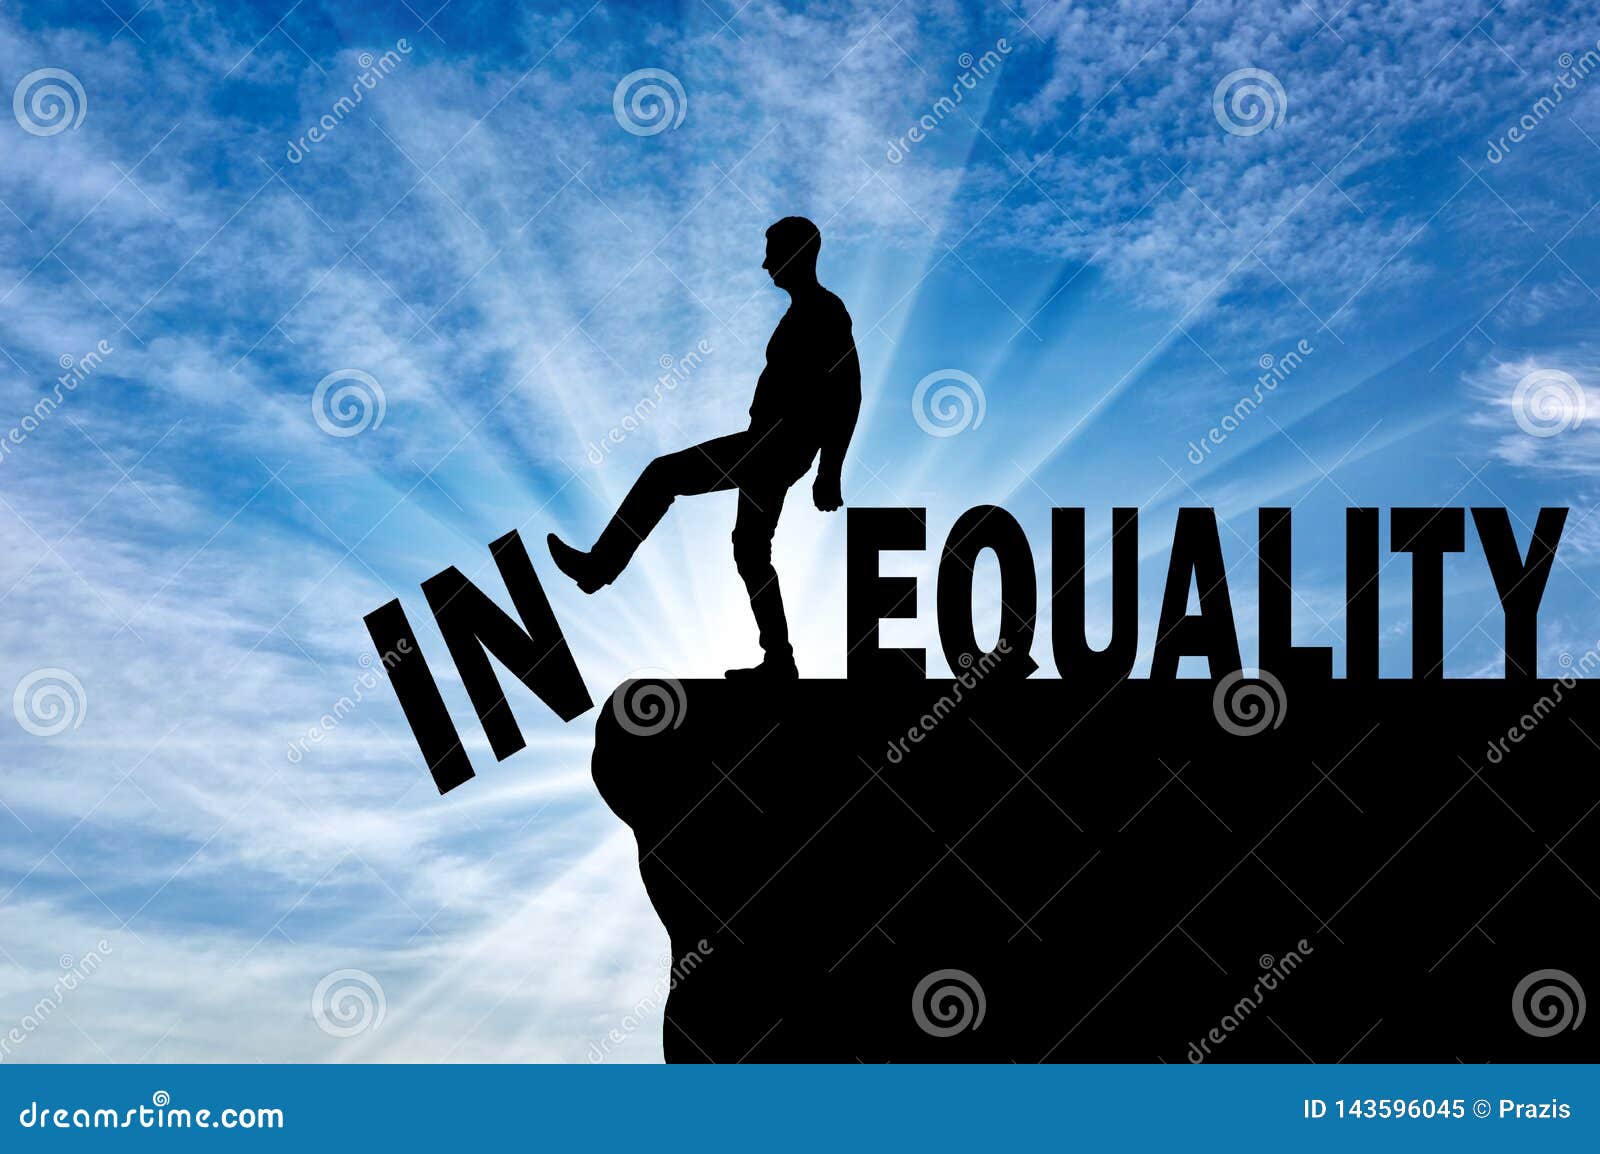 Concept Of Struggle With Inequality In Society Stock Illustration Illustration Of Push